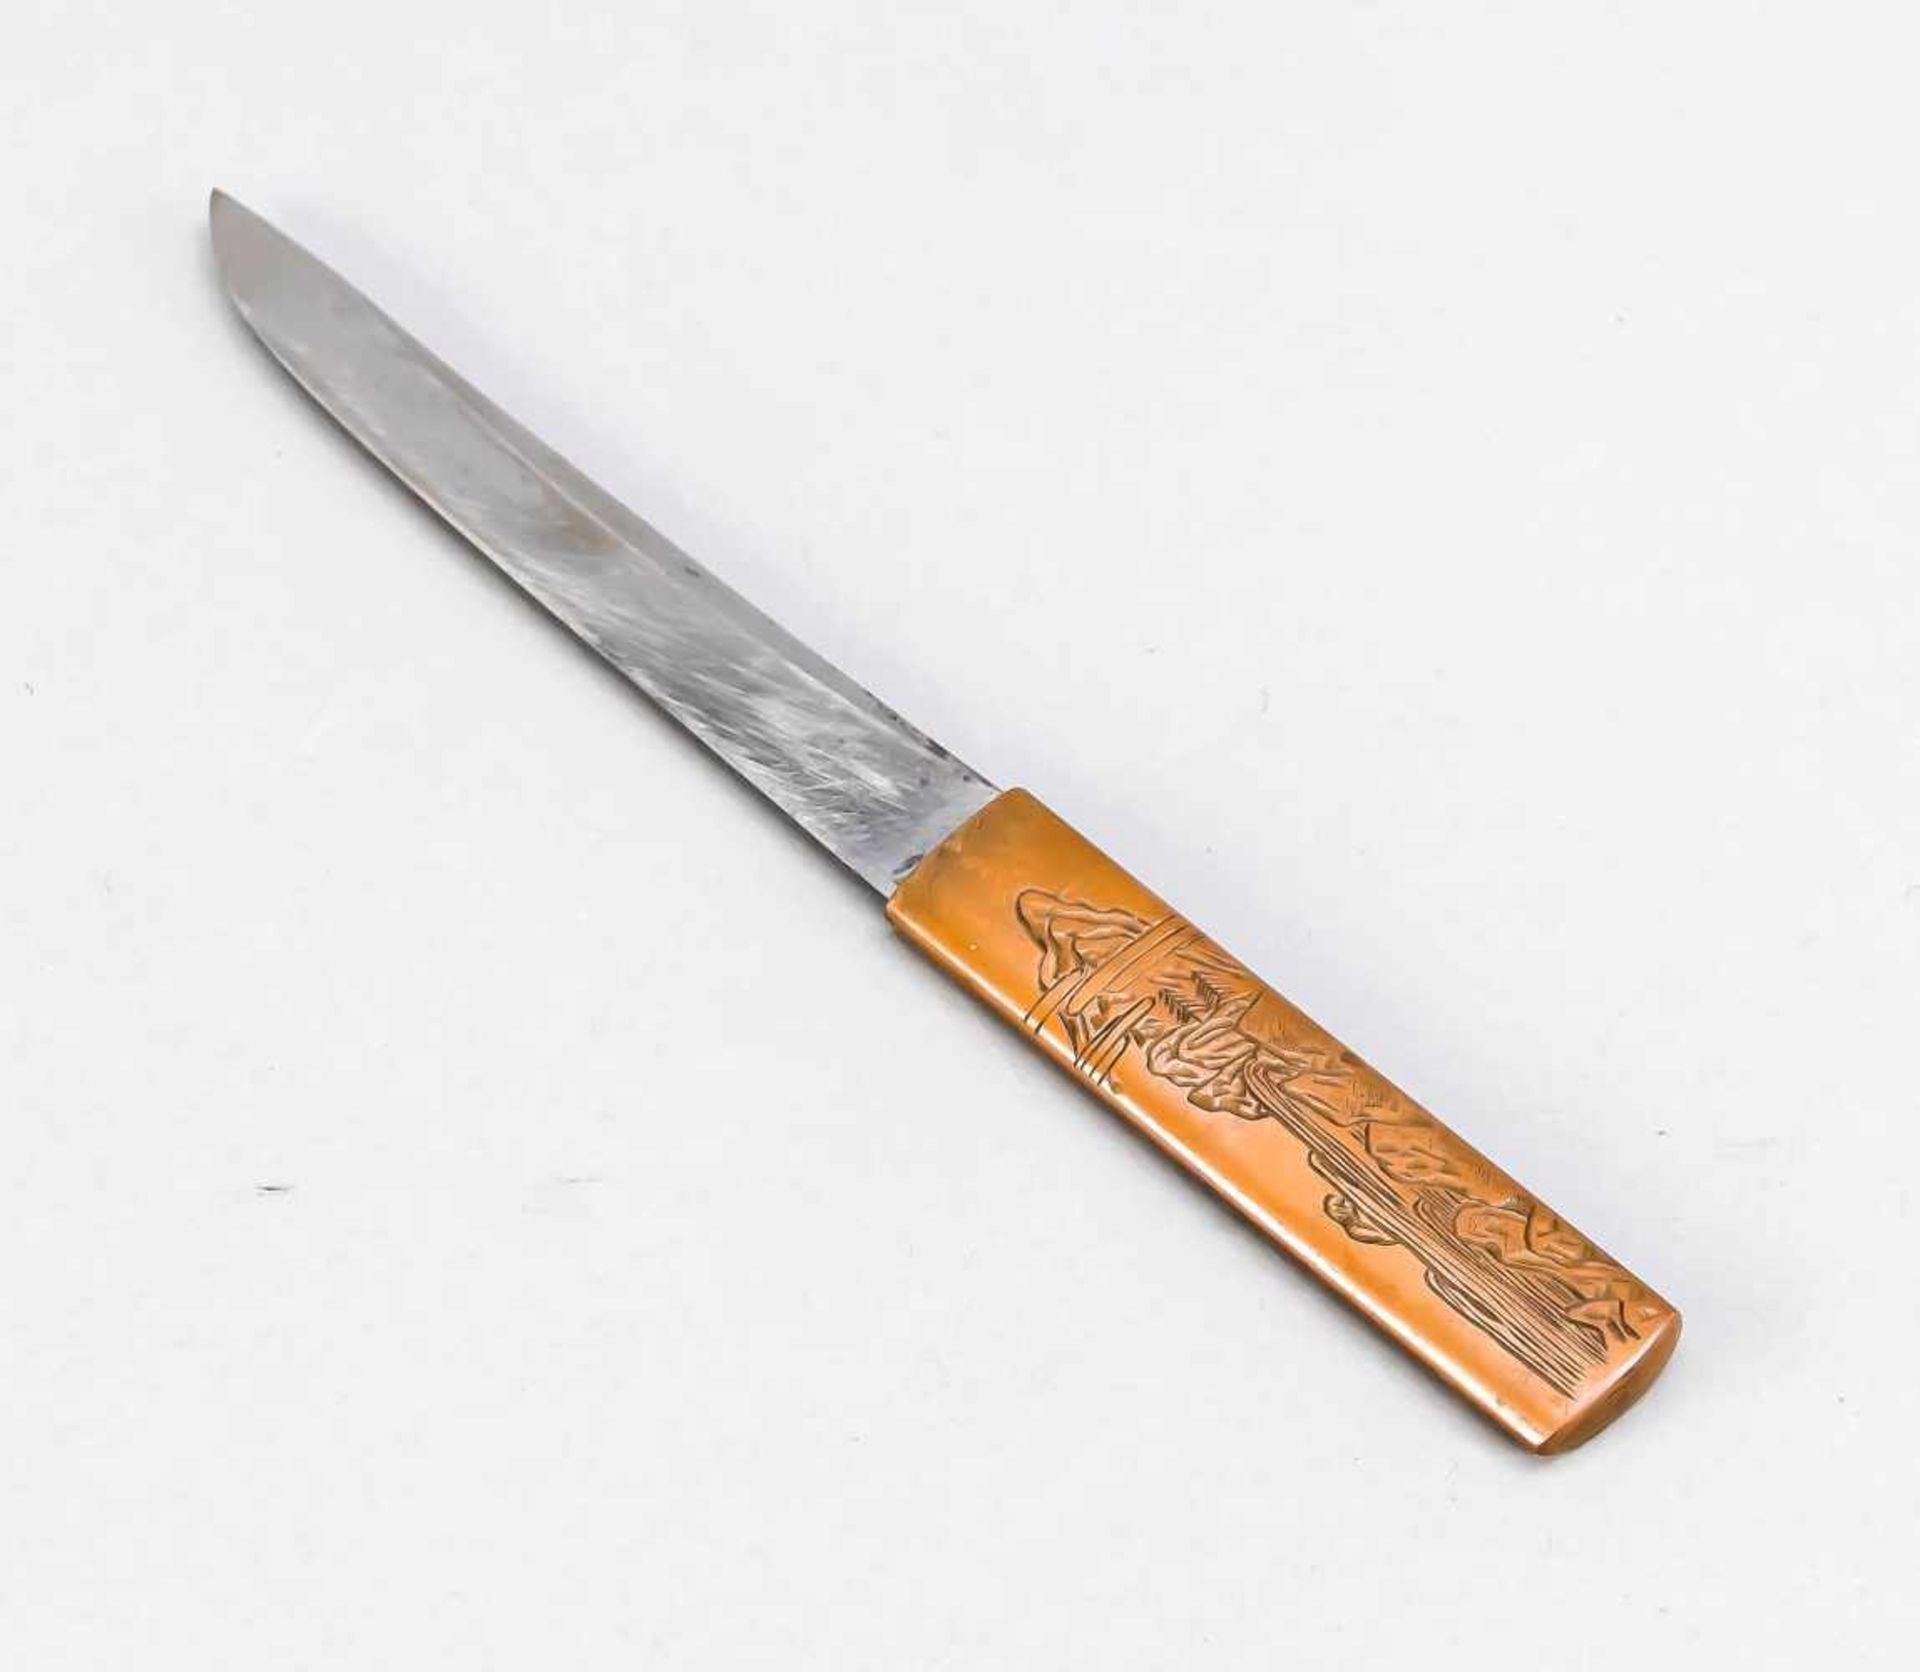 Kotsuka (Katnan Knife), Japan, 19th century, single-edged steel blade. Copper booklet with